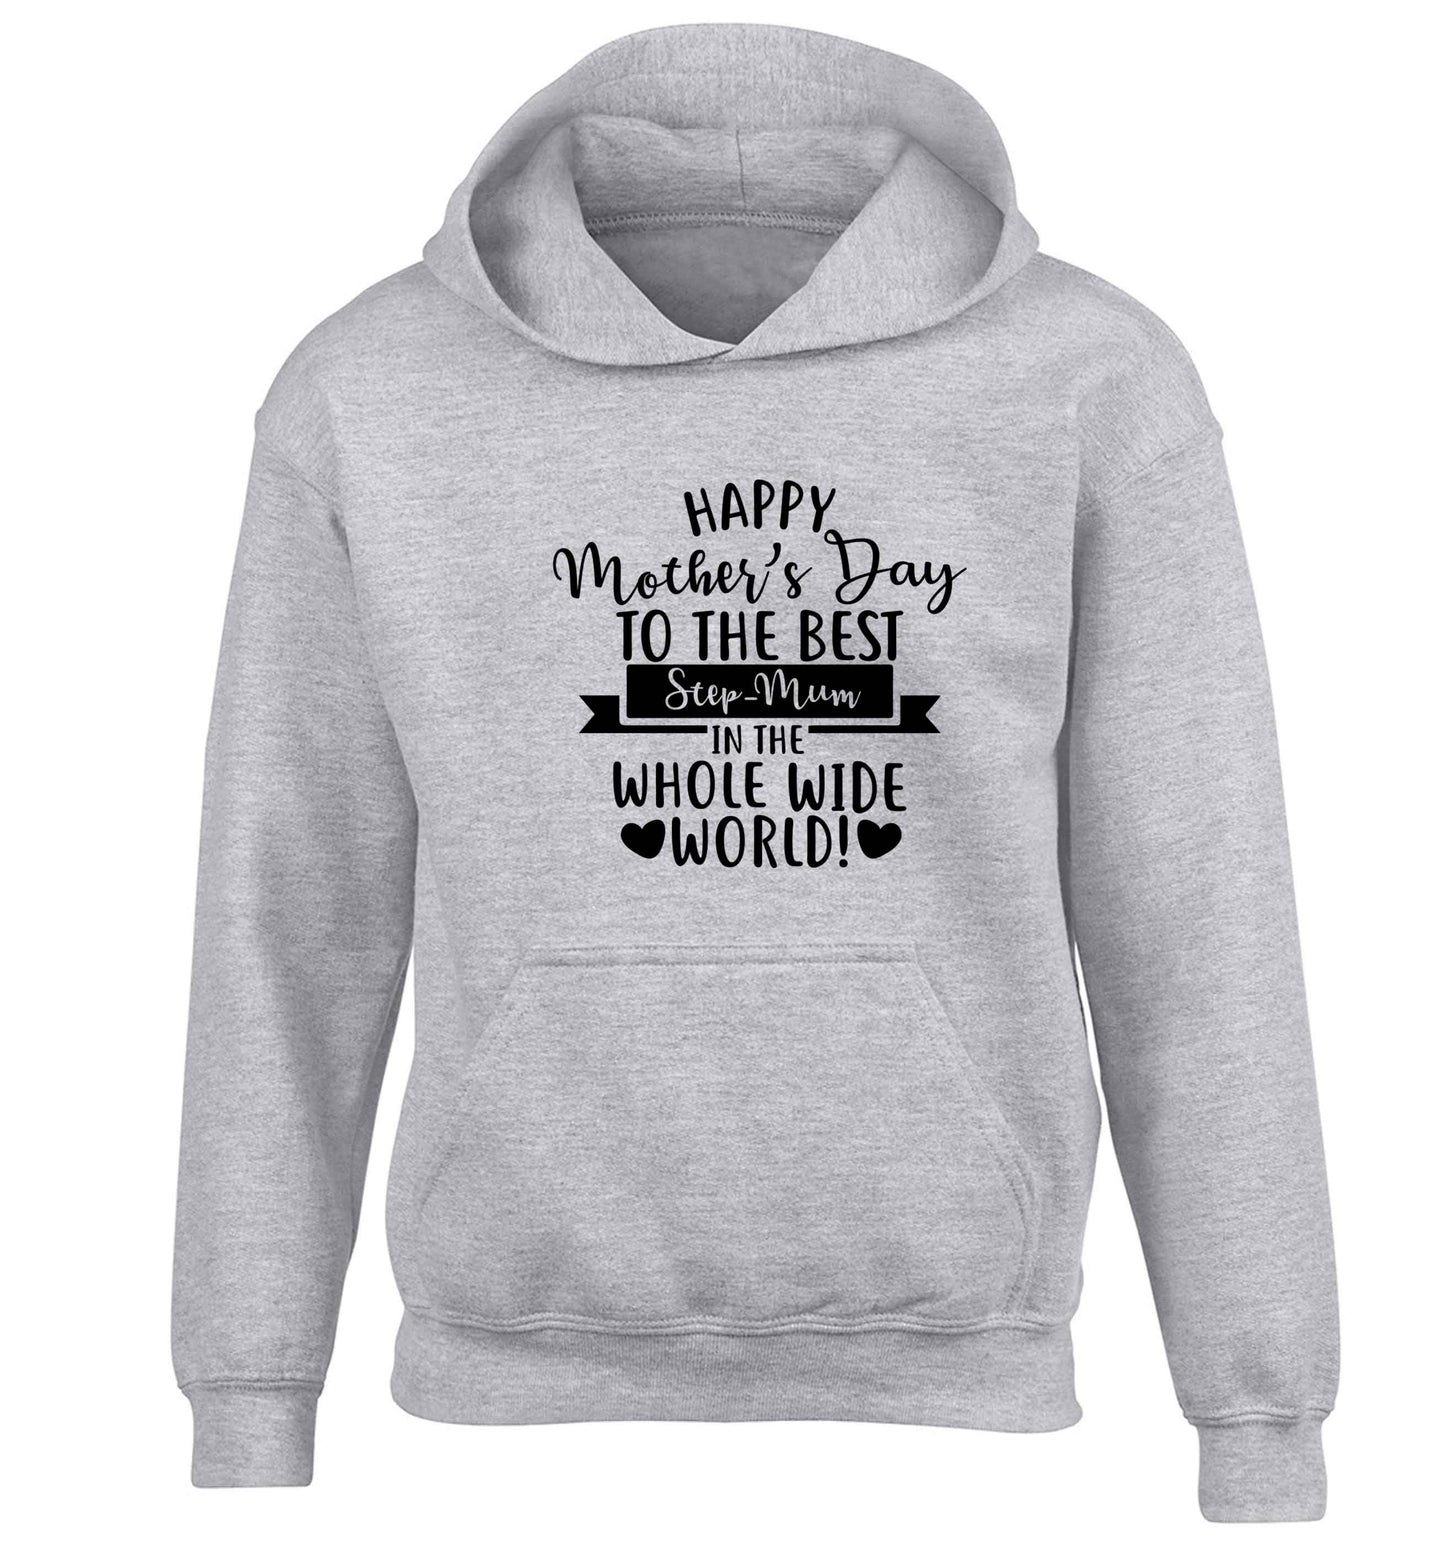 Happy mother's day to the best step-mum in the world children's grey hoodie 12-13 Years